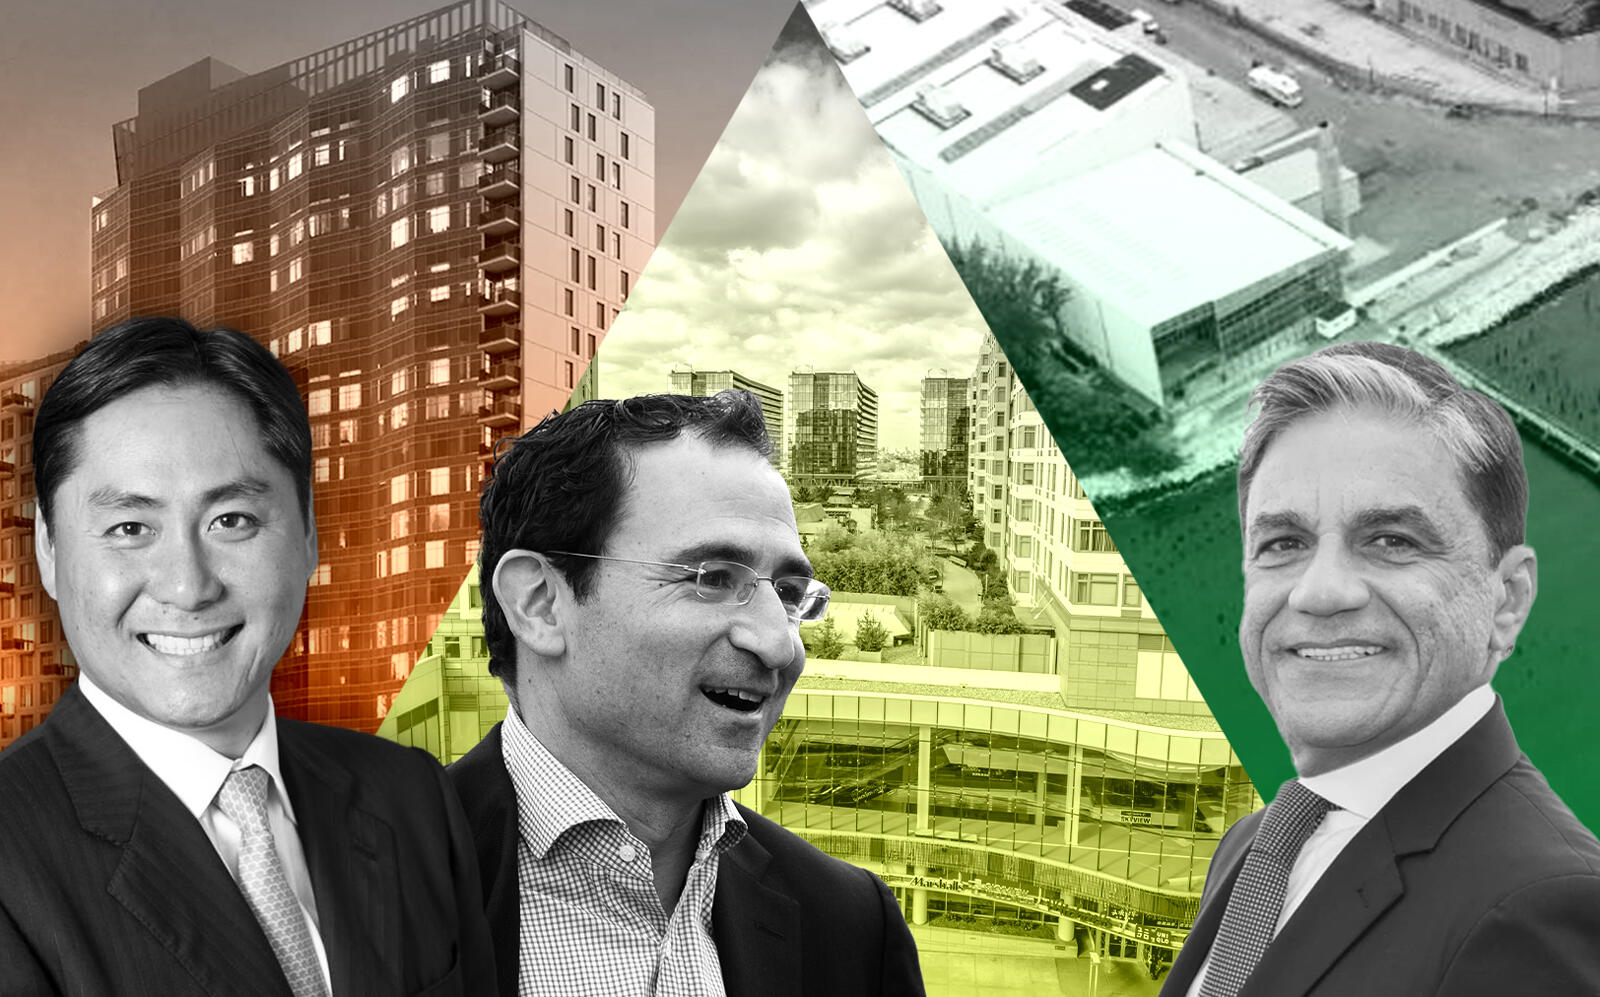 From left: Innovo Property Group CEO Andrew Chung with 1110 Oak Point Avenue, Blackstone’s Jon Gray with the  Skyview Mall and Joseph Moinian with 123 Linden Blvd (New York Expo Center, Innovo, The Moinian Group, Getty, Shops at Skyview)